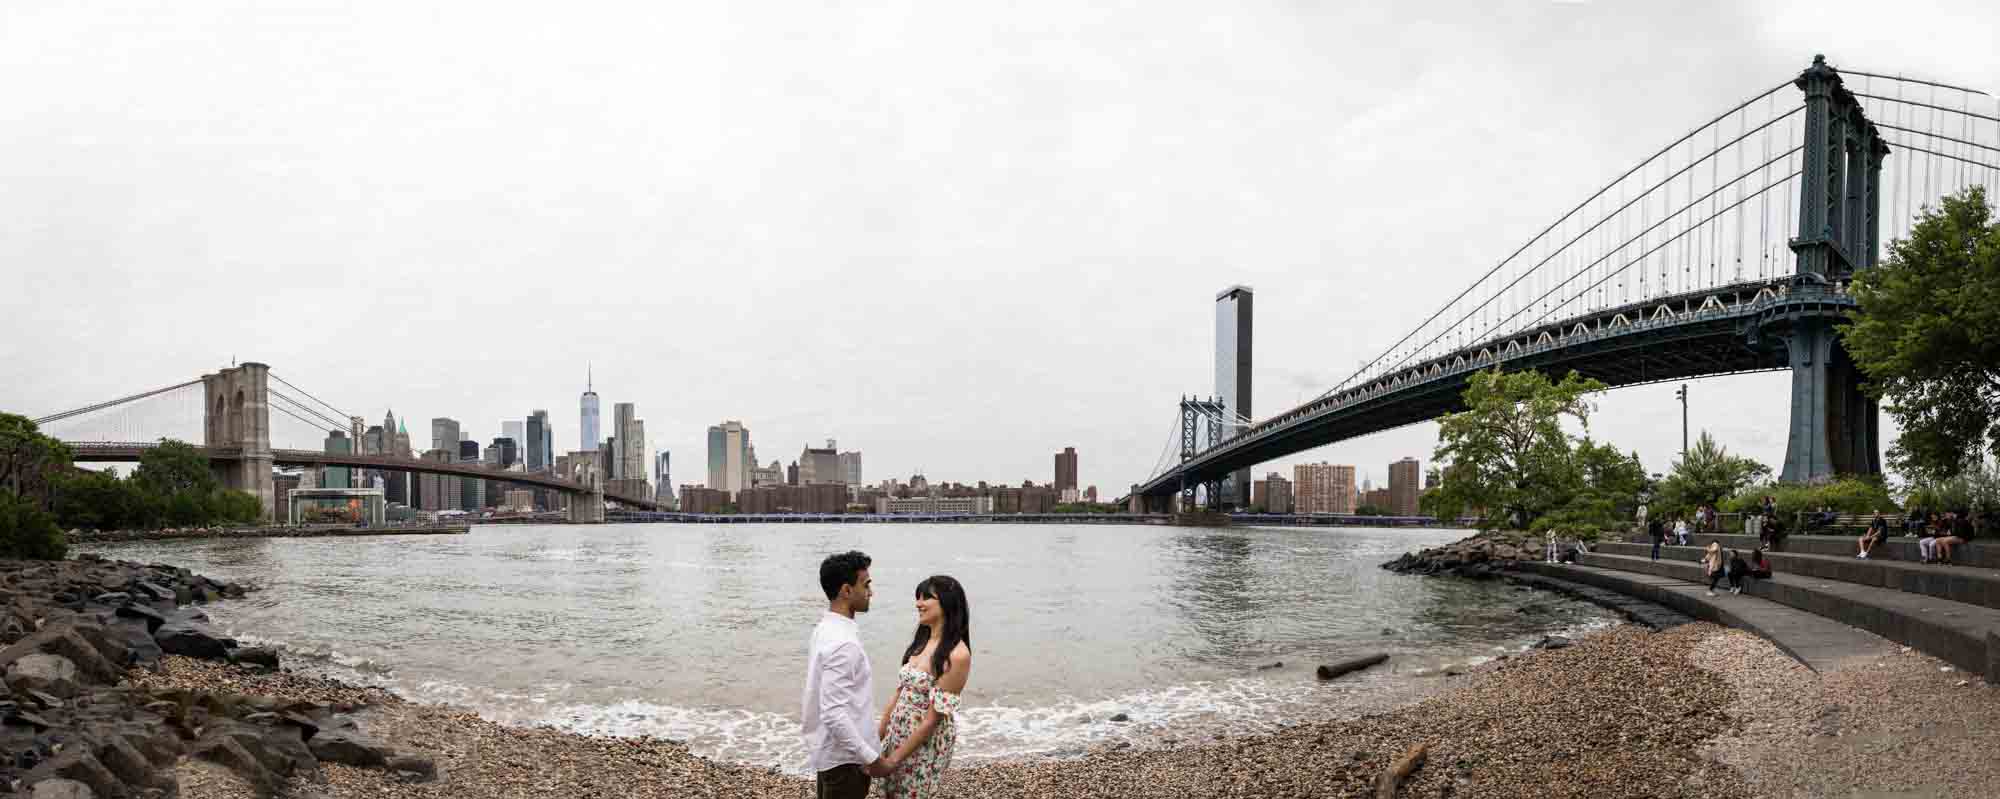 Panorama shot of couple on beach with NYC skyline in background at Brooklyn Bridge Park